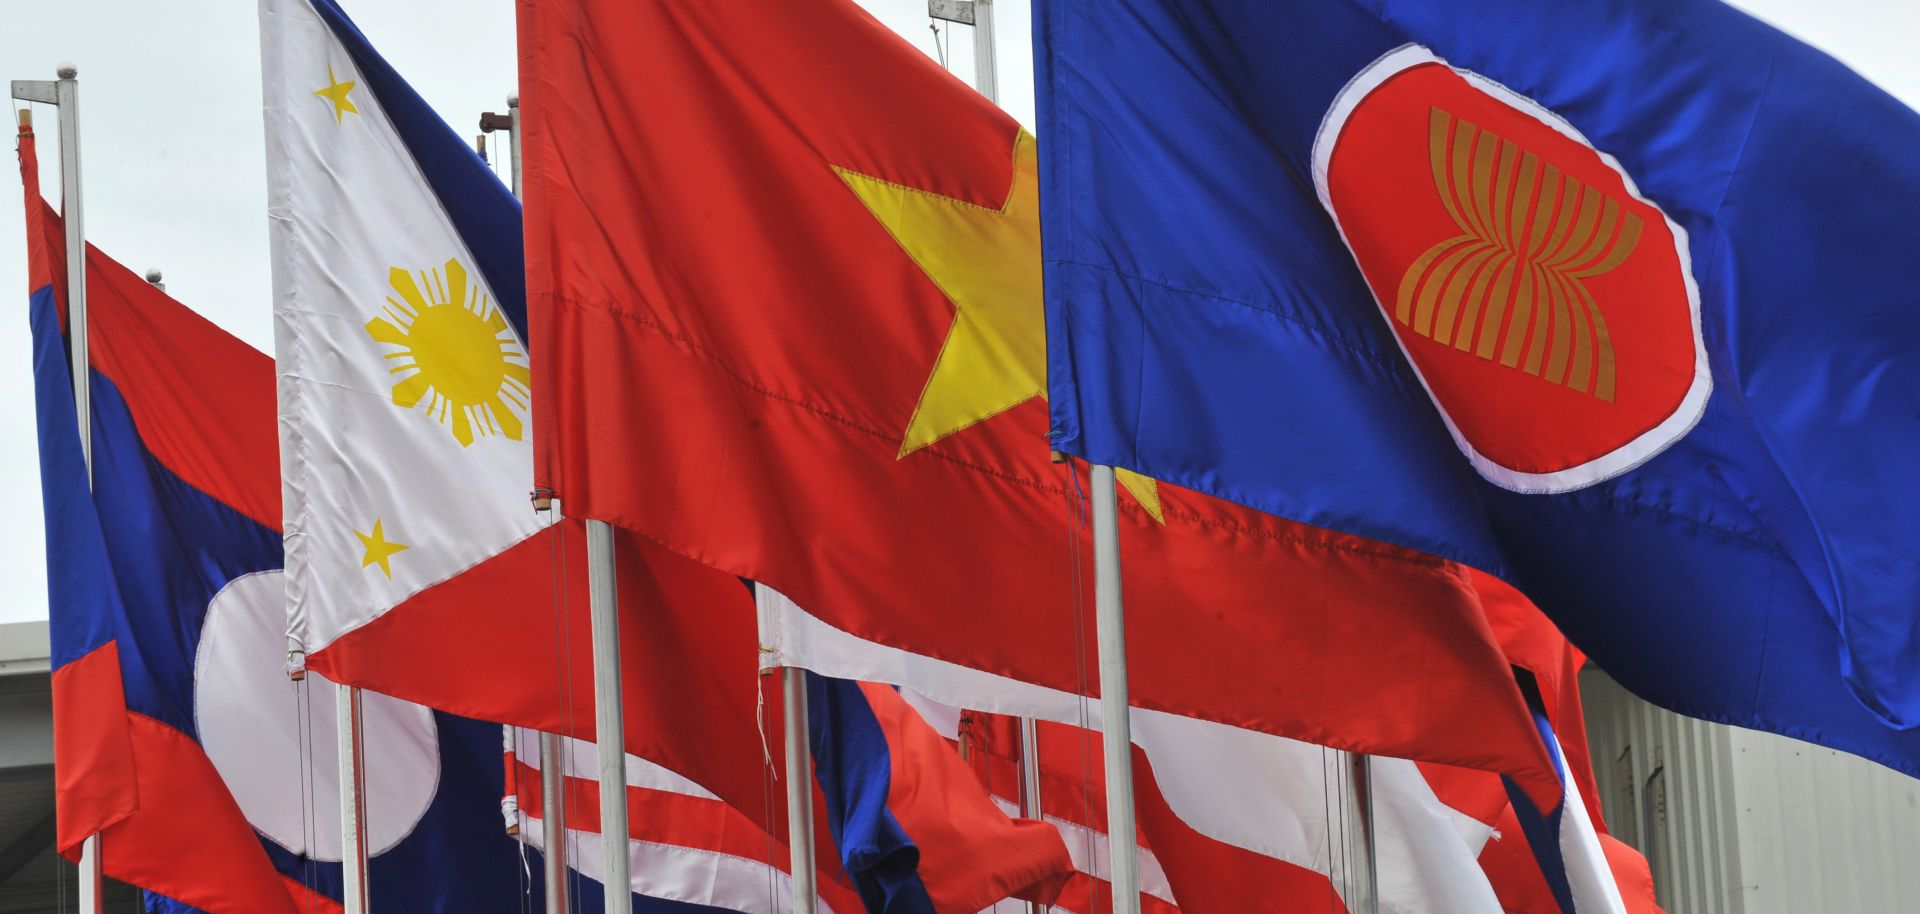 The Association of Southeast Asian Nations is marking the 50th anniversary of its founding.